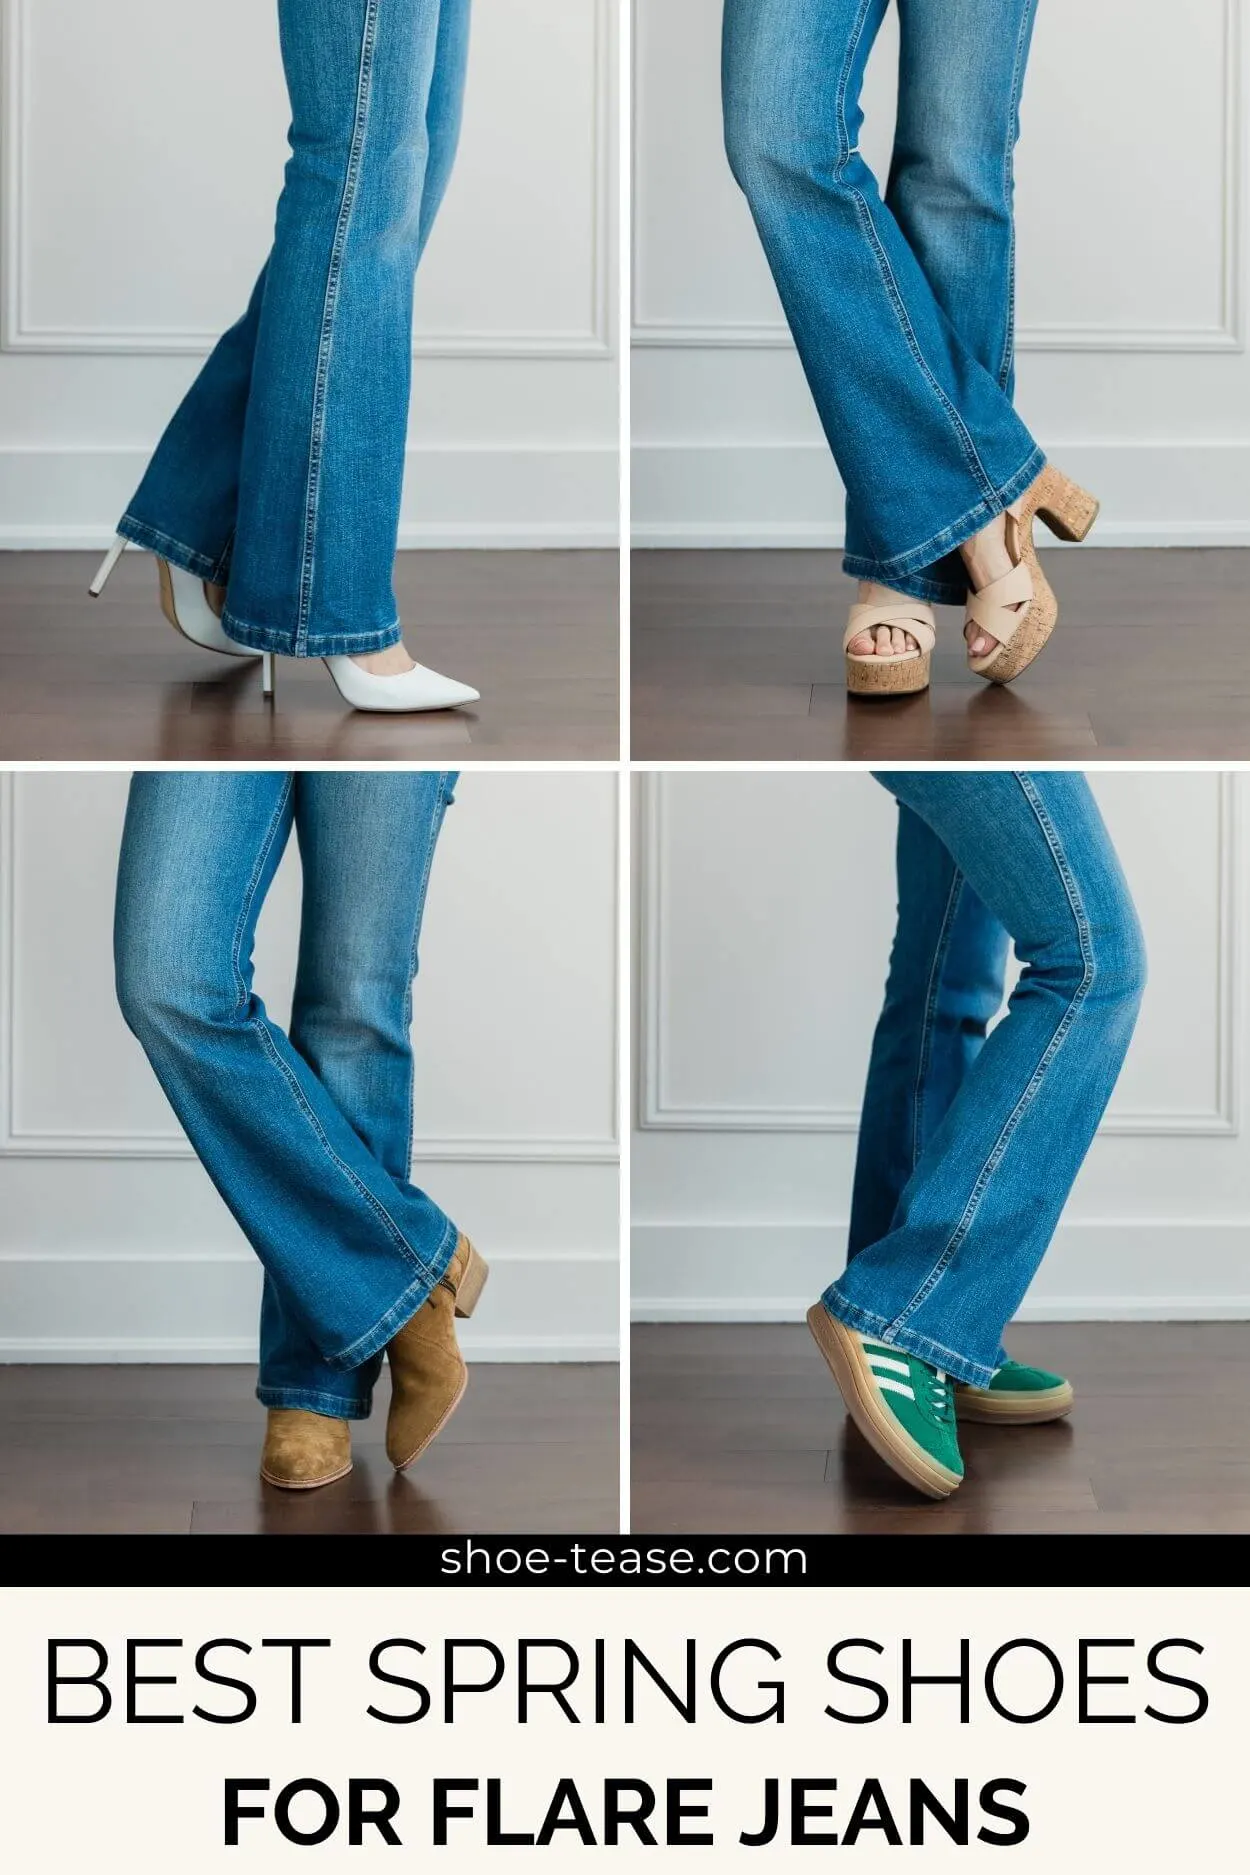 Collage of 4 cropped views of woman's legs wearing long blue flare jeans with different spring summer shoes.